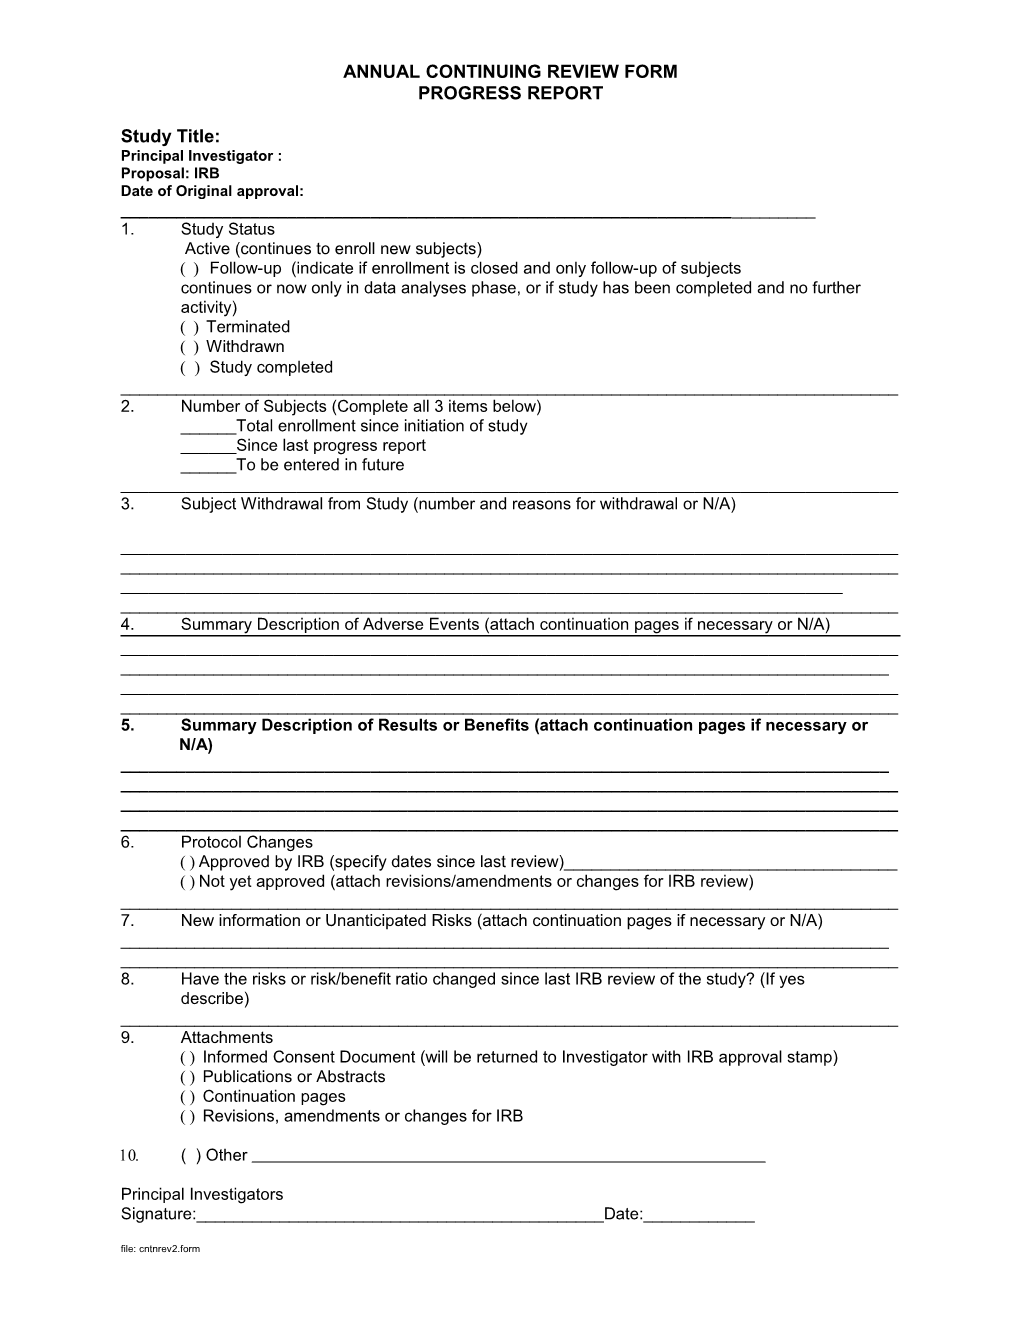 Annual Continuing Review Form